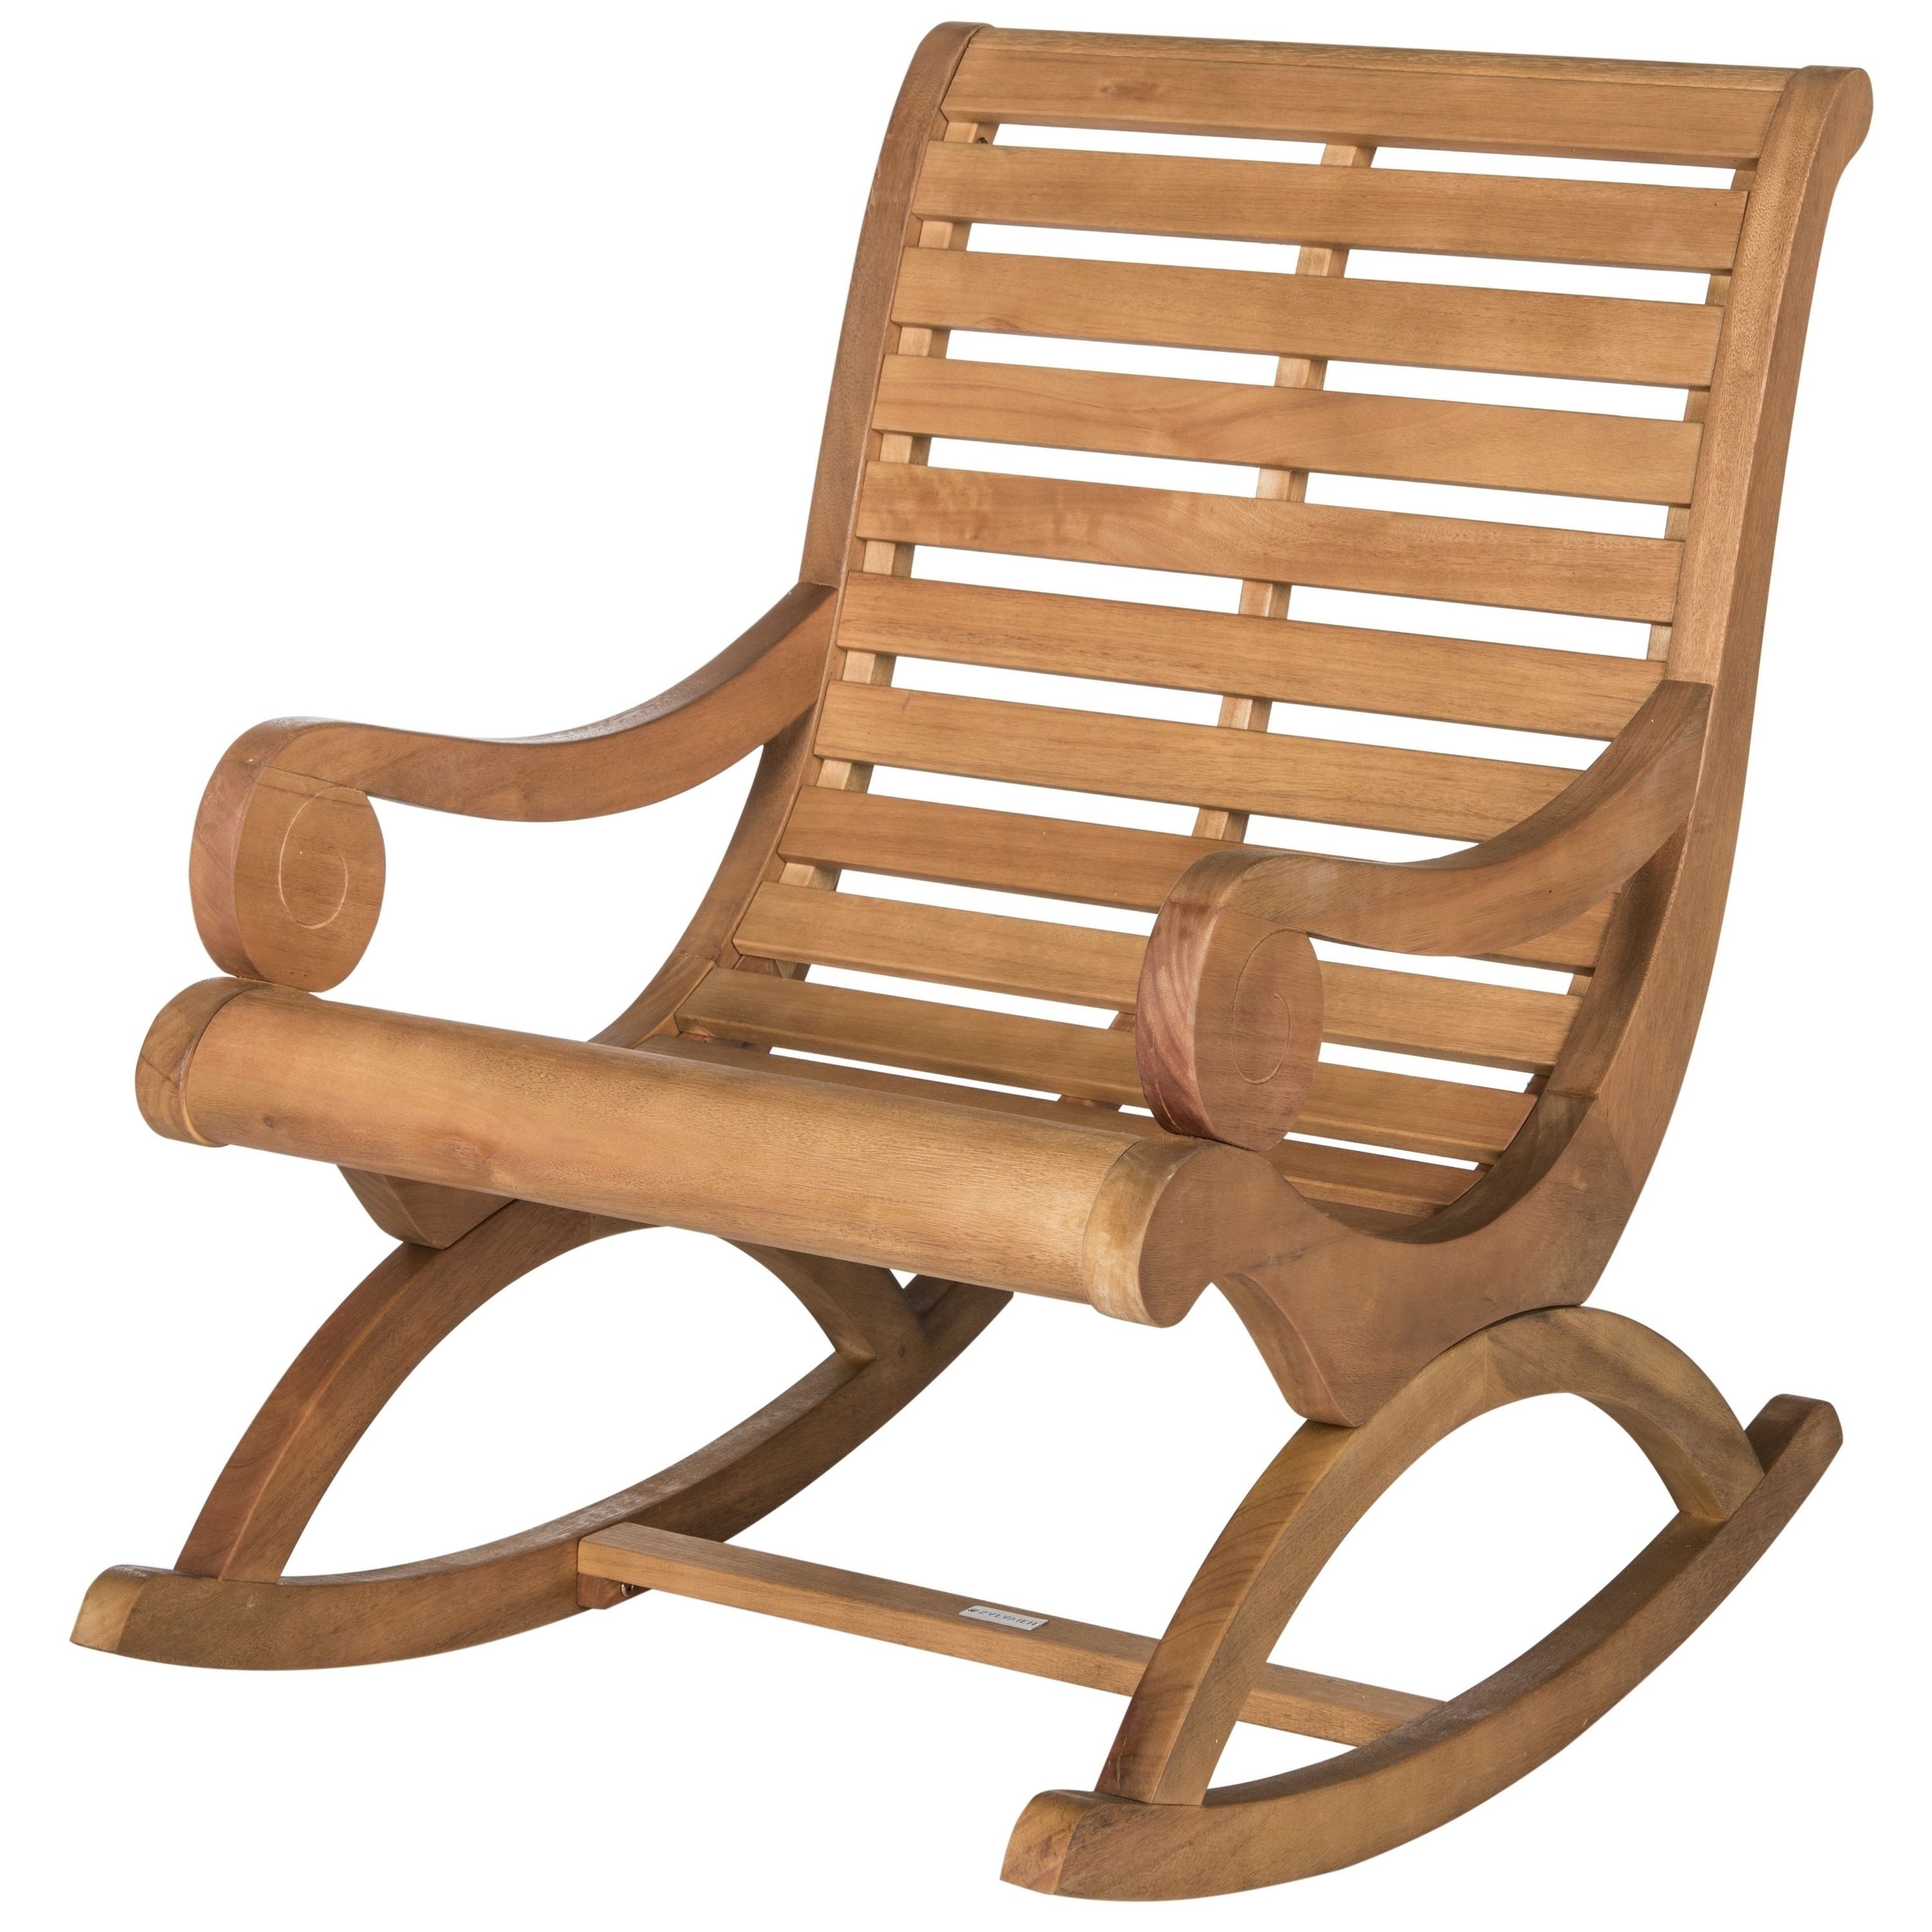 Most Current Safavieh Outdoor Living Sonora Teak Brown Rocking Chair – Overstock Inside Quinn Teak Sofa Chairs (View 18 of 20)